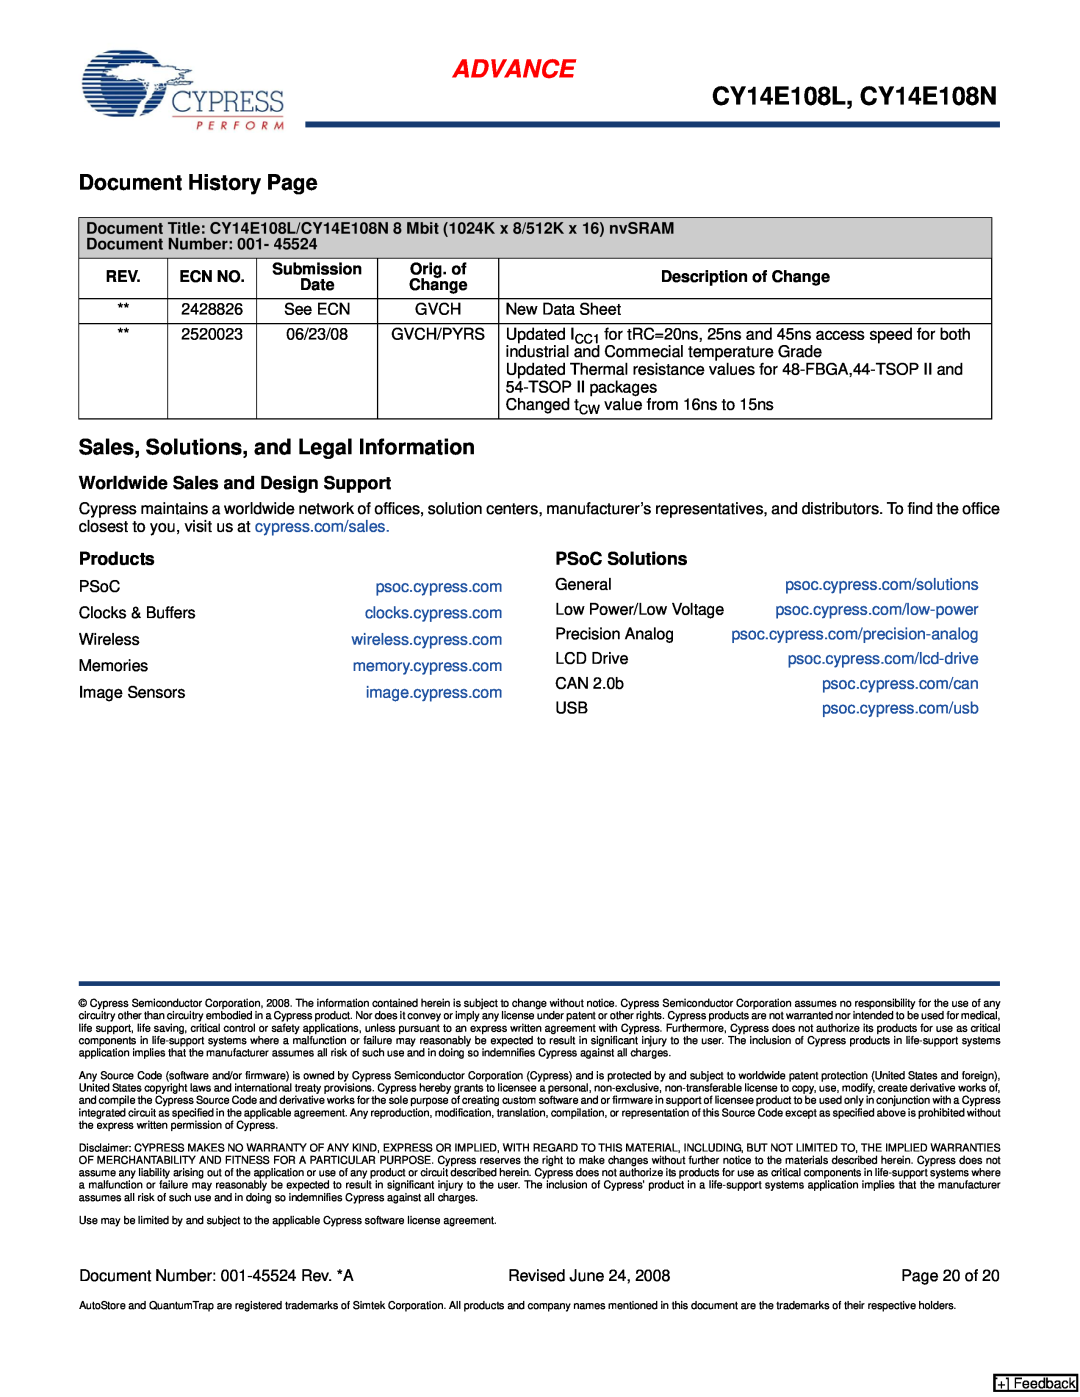 Cypress CY14B102N manual Document History Page, Sales, Solutions, and Legal Information, Worldwide Sales and Design Support 